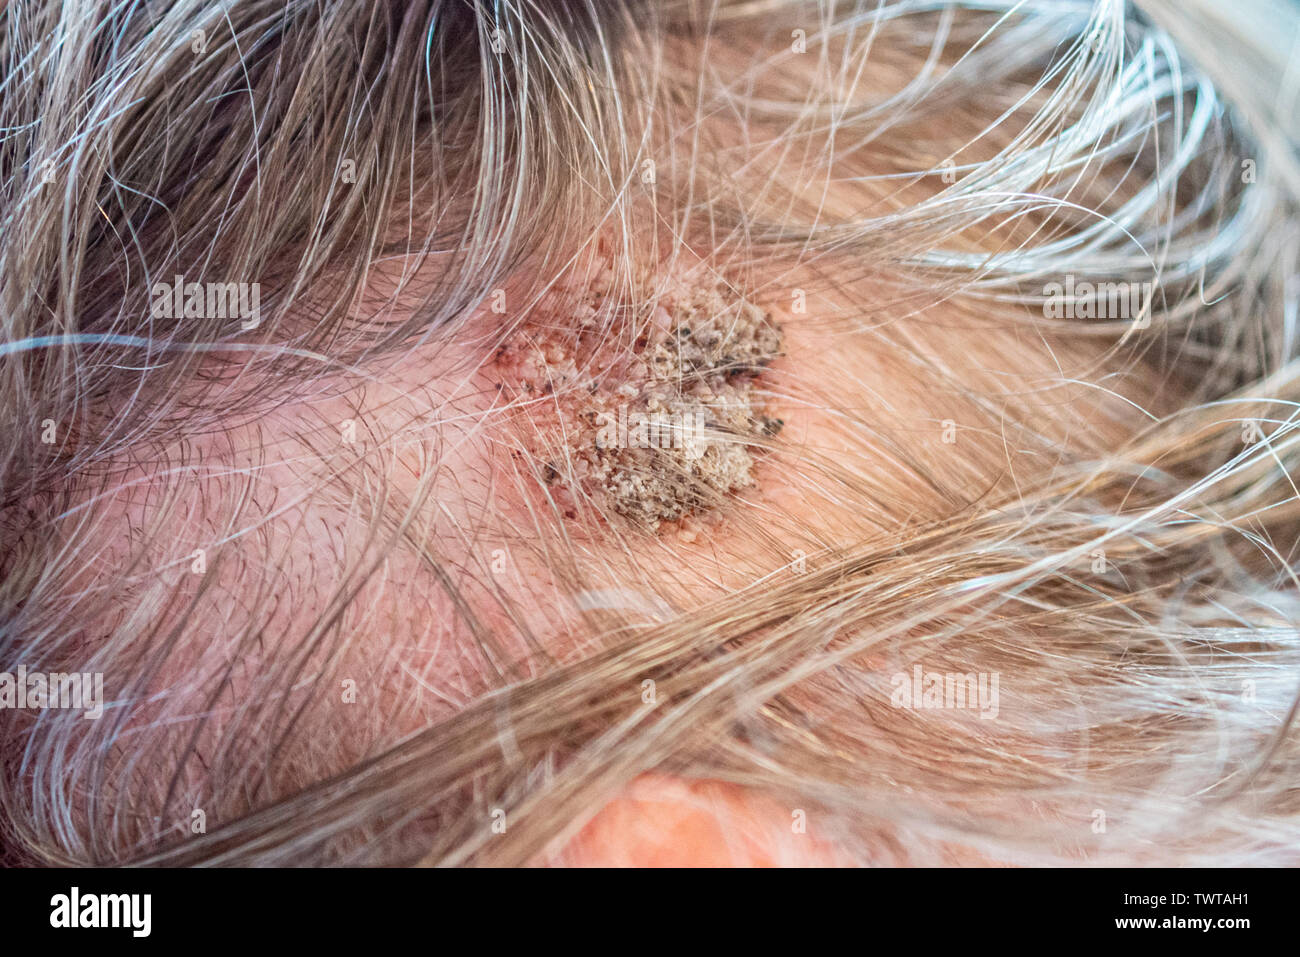 Seborrheic keratoses benign skin tumour on a male scalp with a bumpy appearance. Head lesion. Large wart like growth in hairline. Medical condition Stock Photo